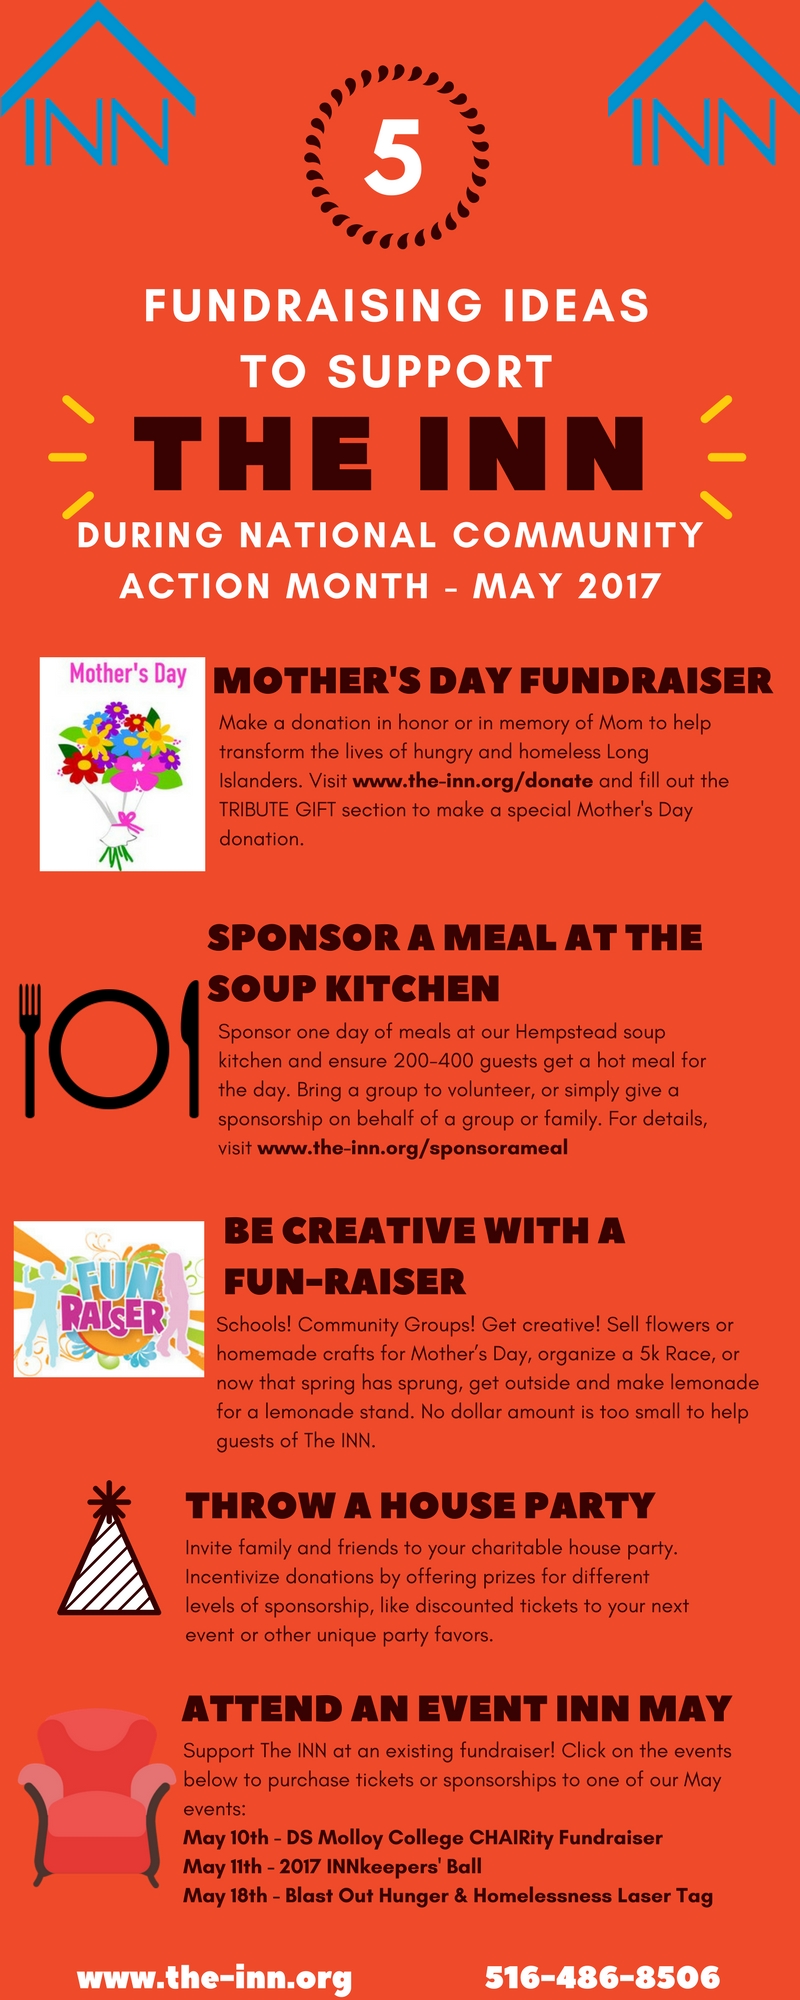 10 Nice Fundraising Ideas For Small Groups fundraising ideas for national community action month the inn 1 2022